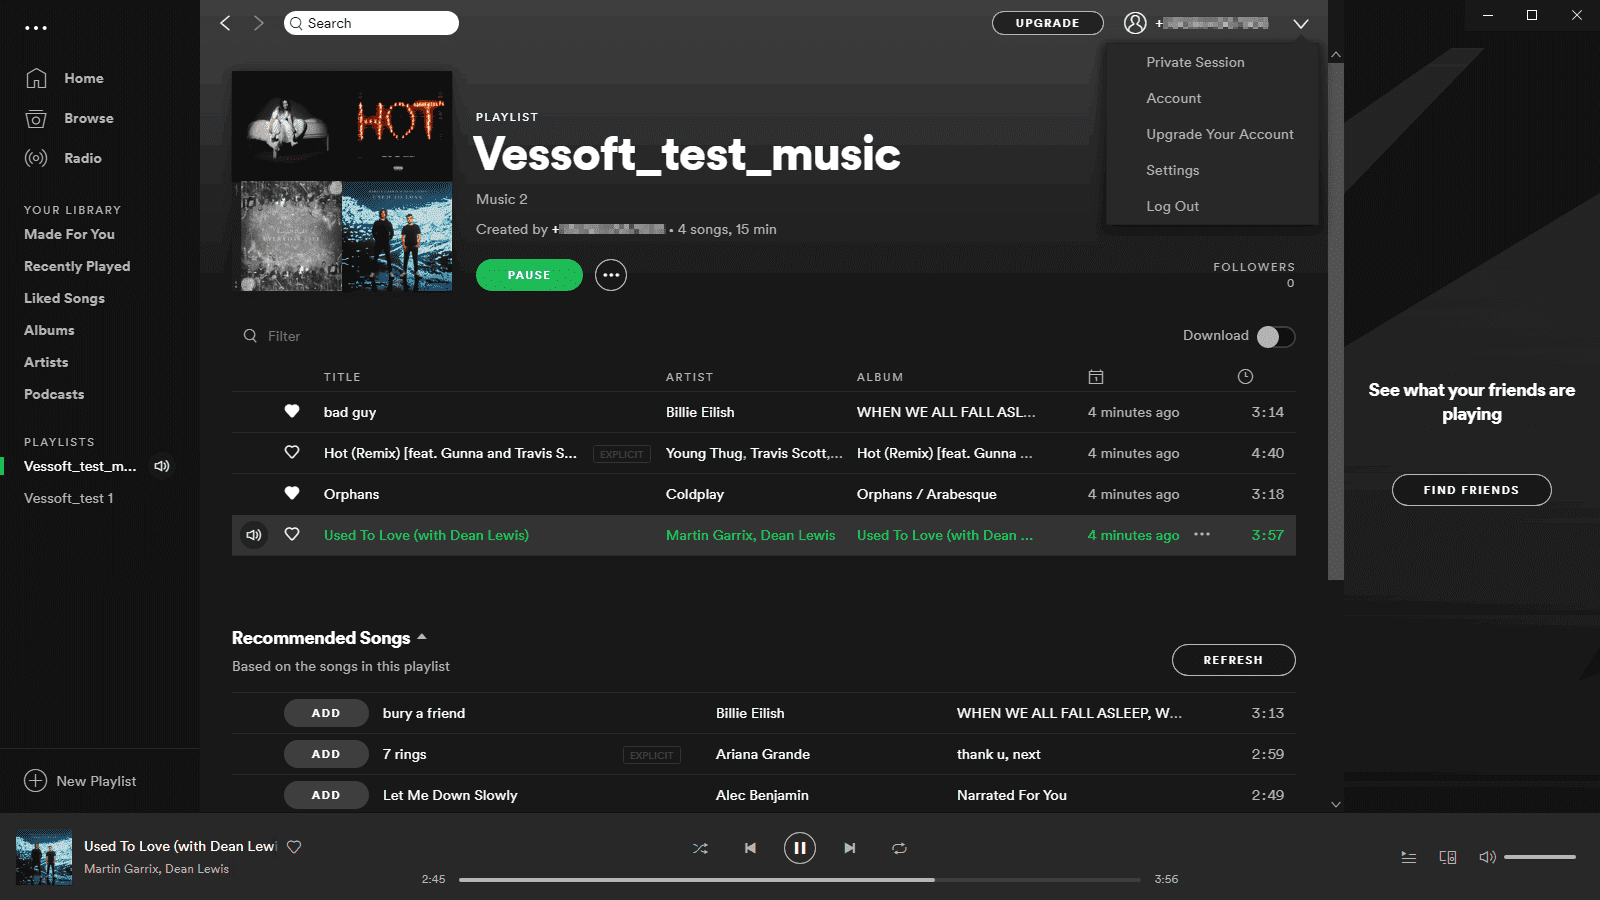 download the last version for windows Spotify 1.2.14.1141